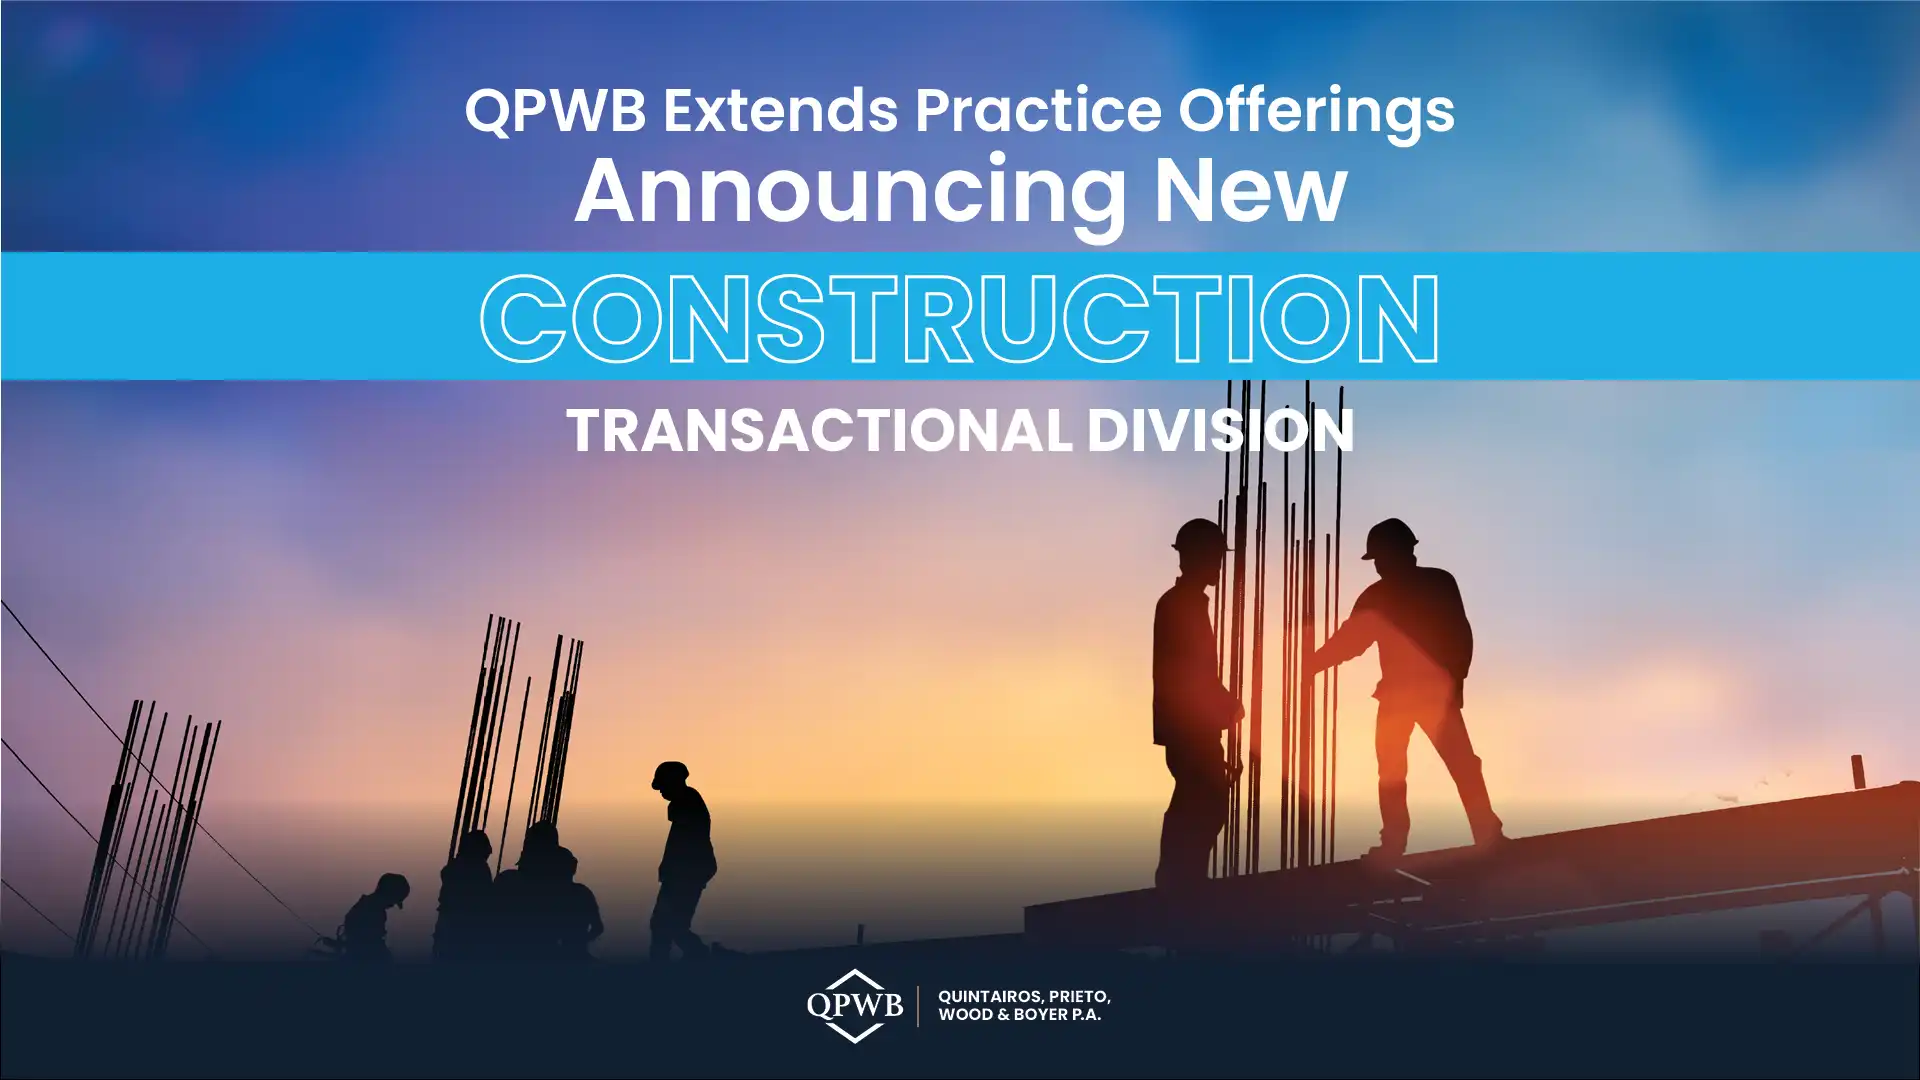 QPWB Extends Practice Offerings Announcing New Construction Transactional Division